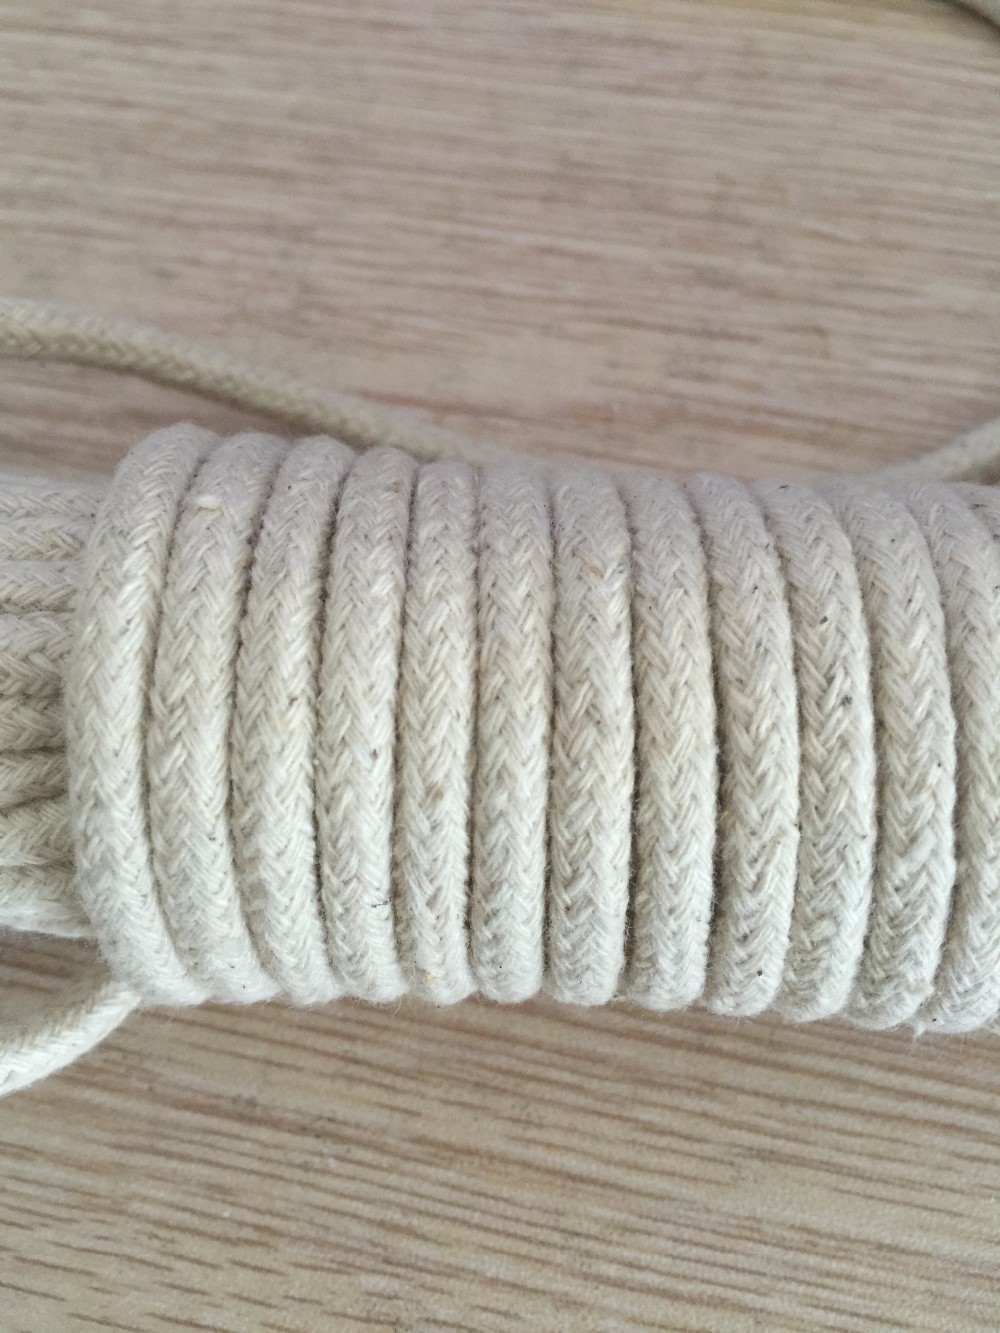 15mm White Cotton Cord Twisted, 8mm